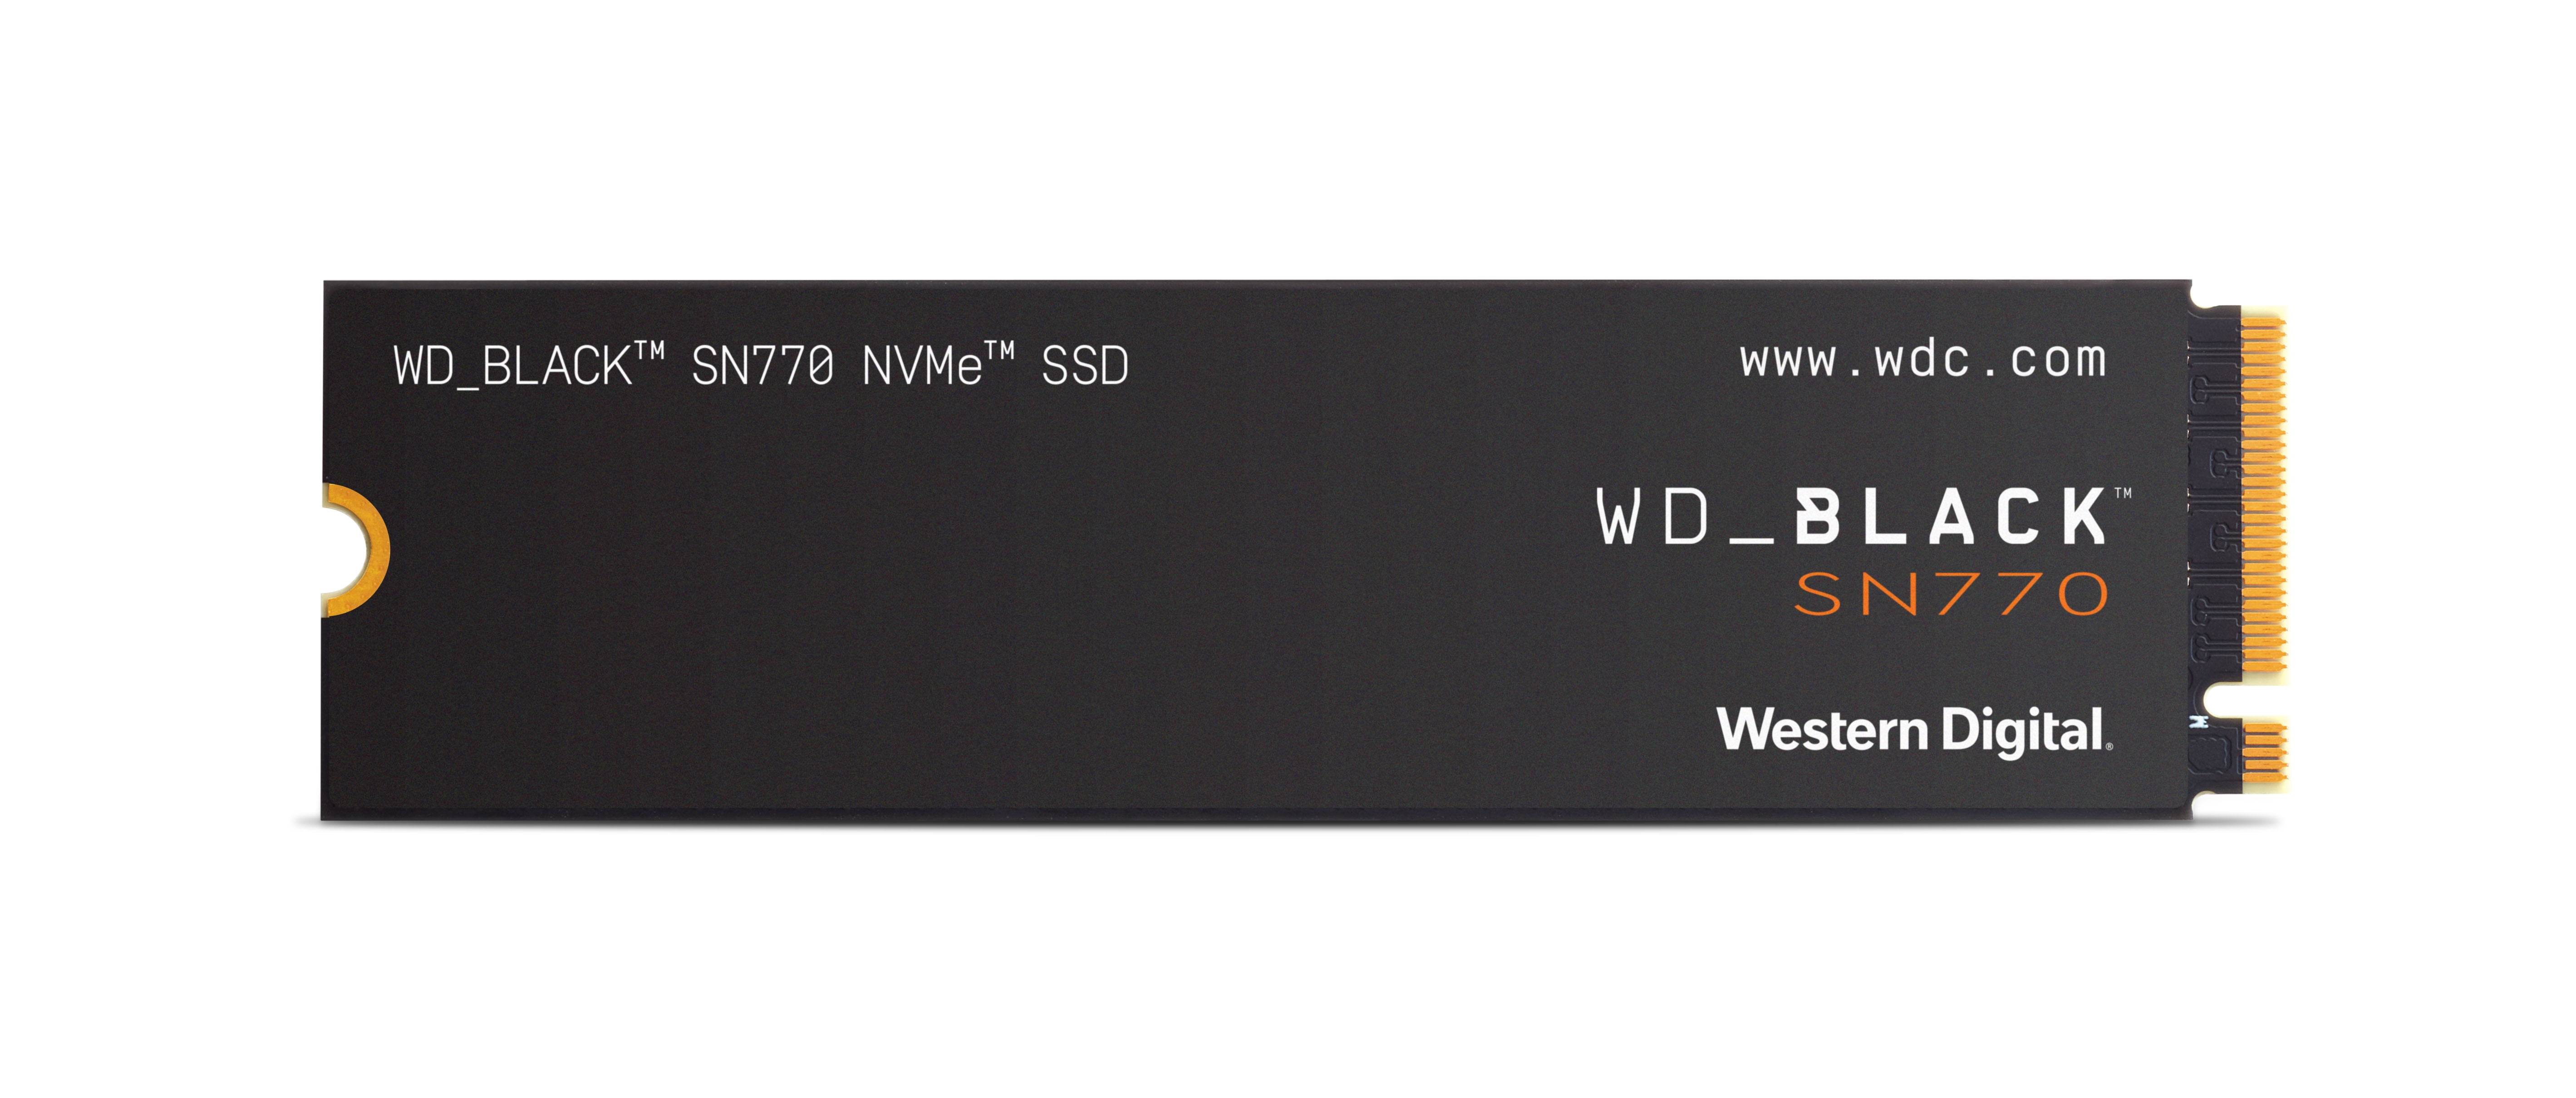 WD Black 1TB SN770 Internal M.2 WRWM 5,150 2280, - MB/s PCIe Gaming up SSD to - State , Gen4 NVMe WDBBDL0010BNC- Drive Solid